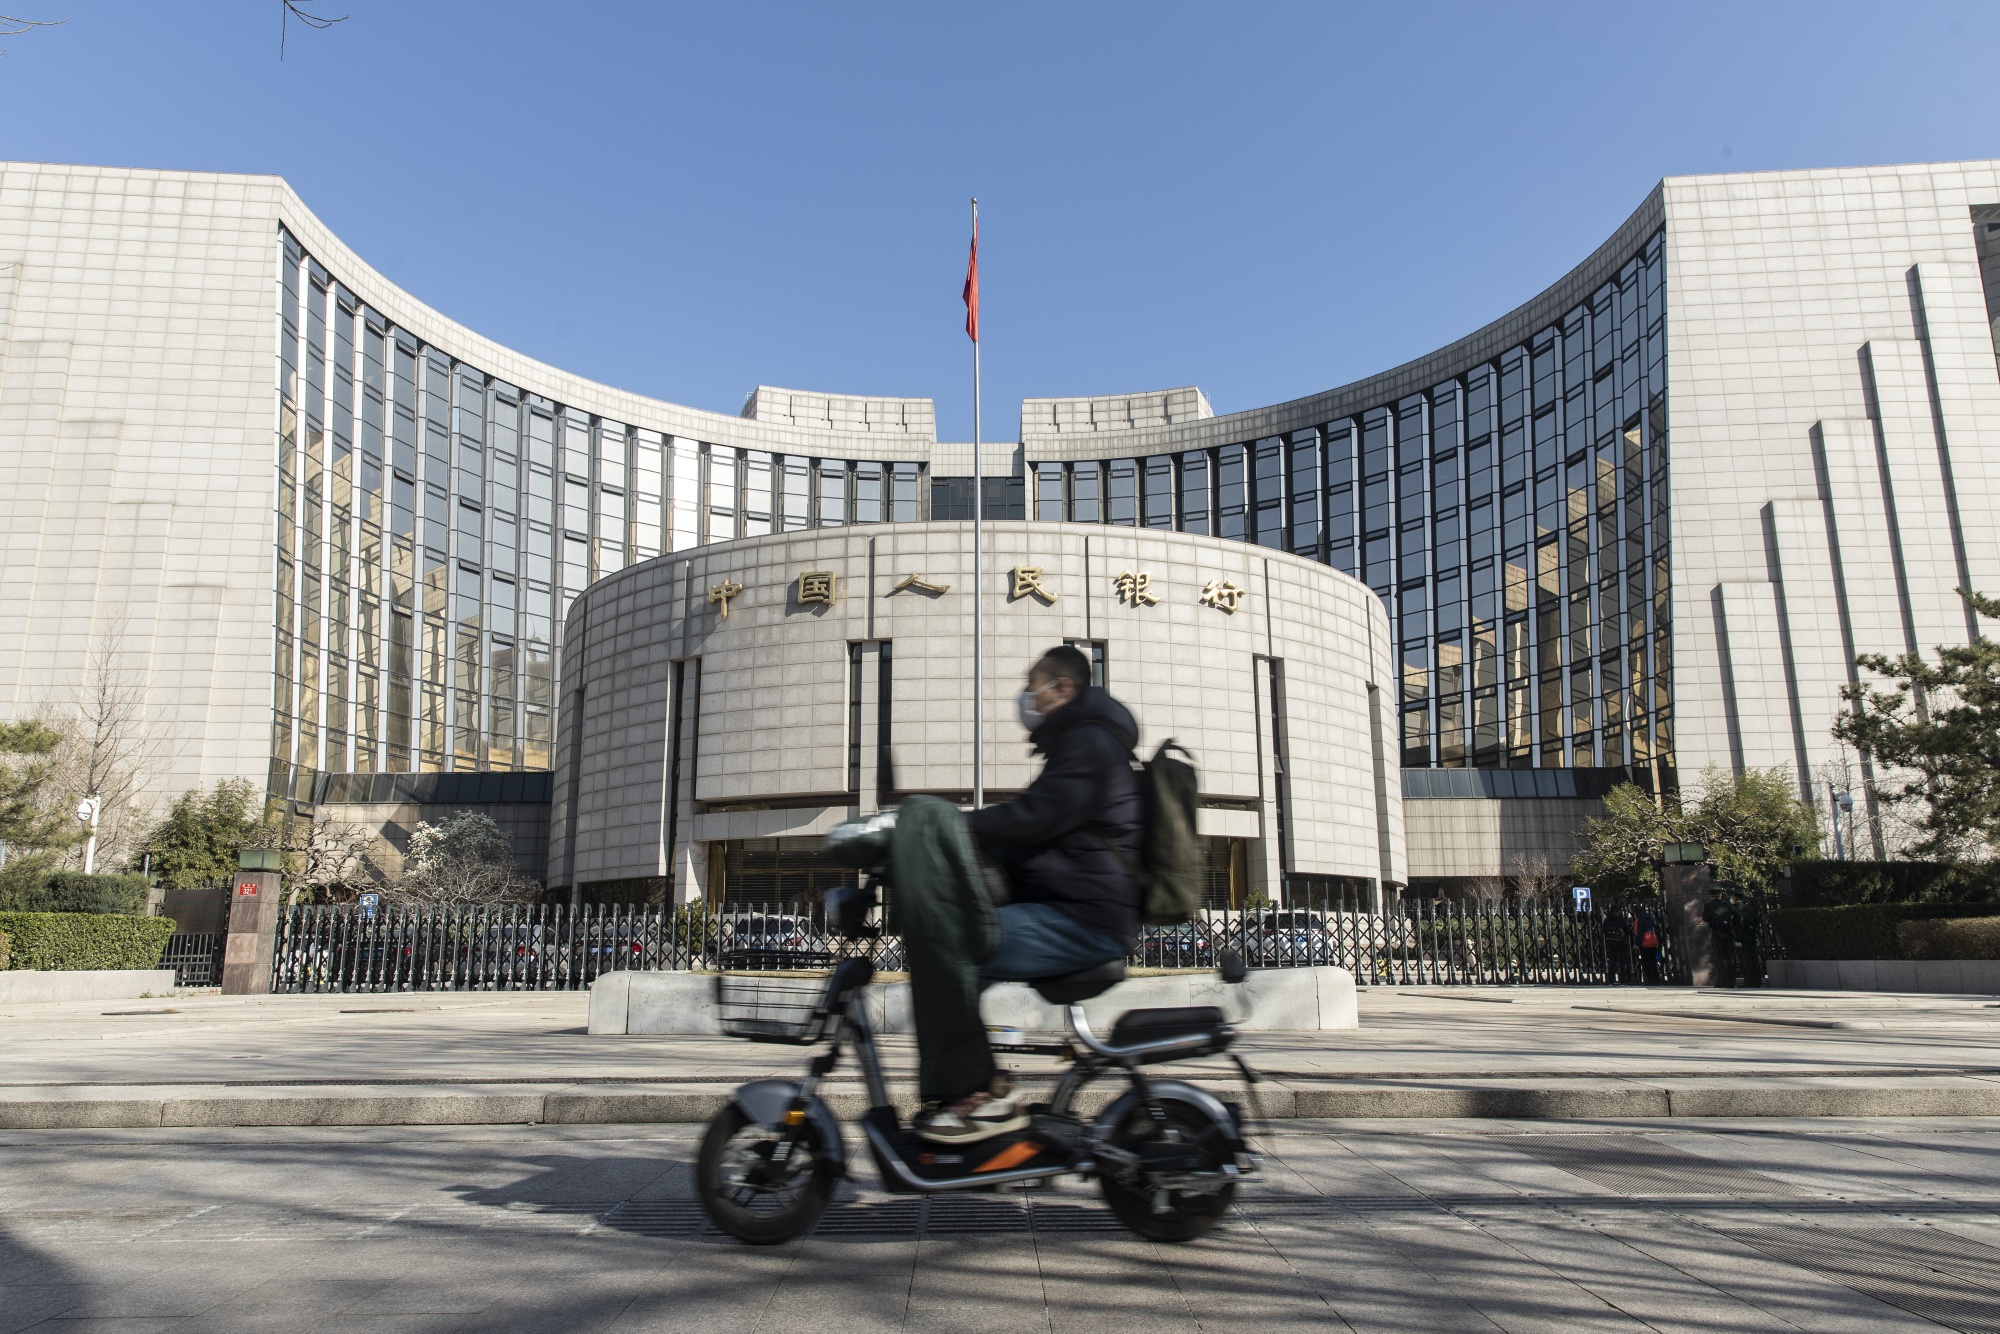 A motorcyclist wearing a protective mask rides past the People's Bank of China building in Beijing.